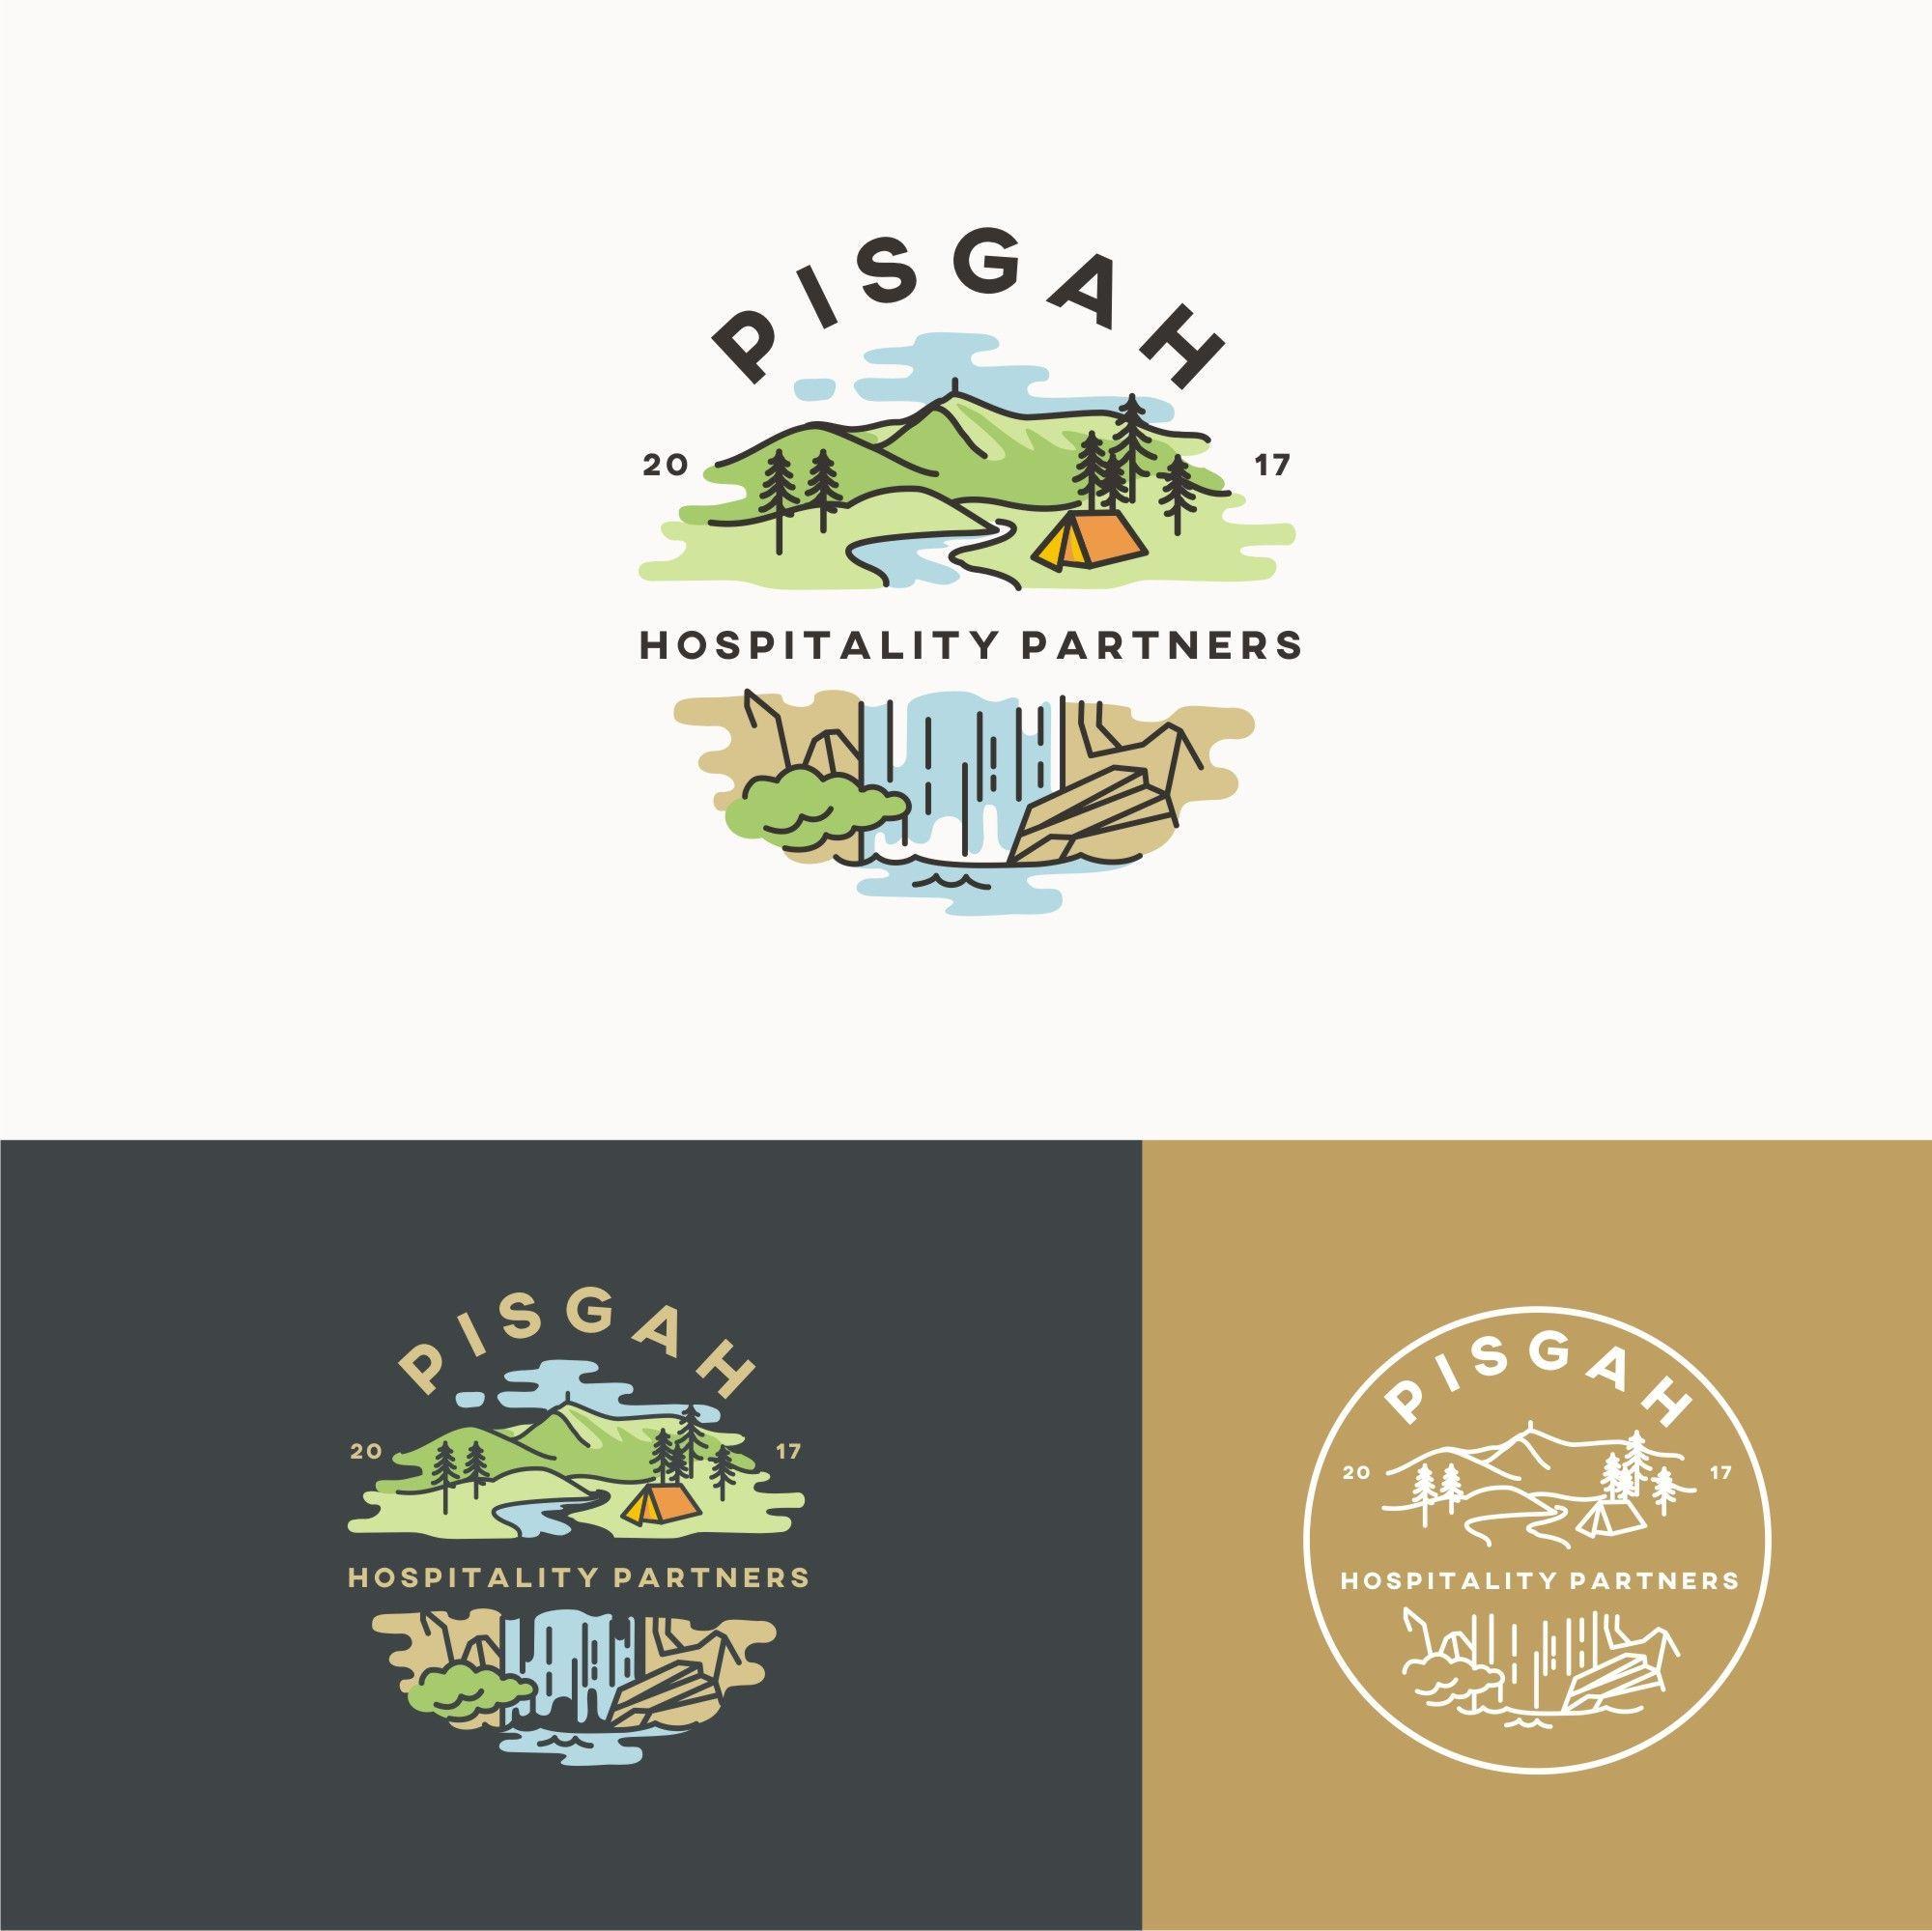 Rustic Company Logo - Rustic logo design by creative.solutions for Pisgah, an outdoor ...